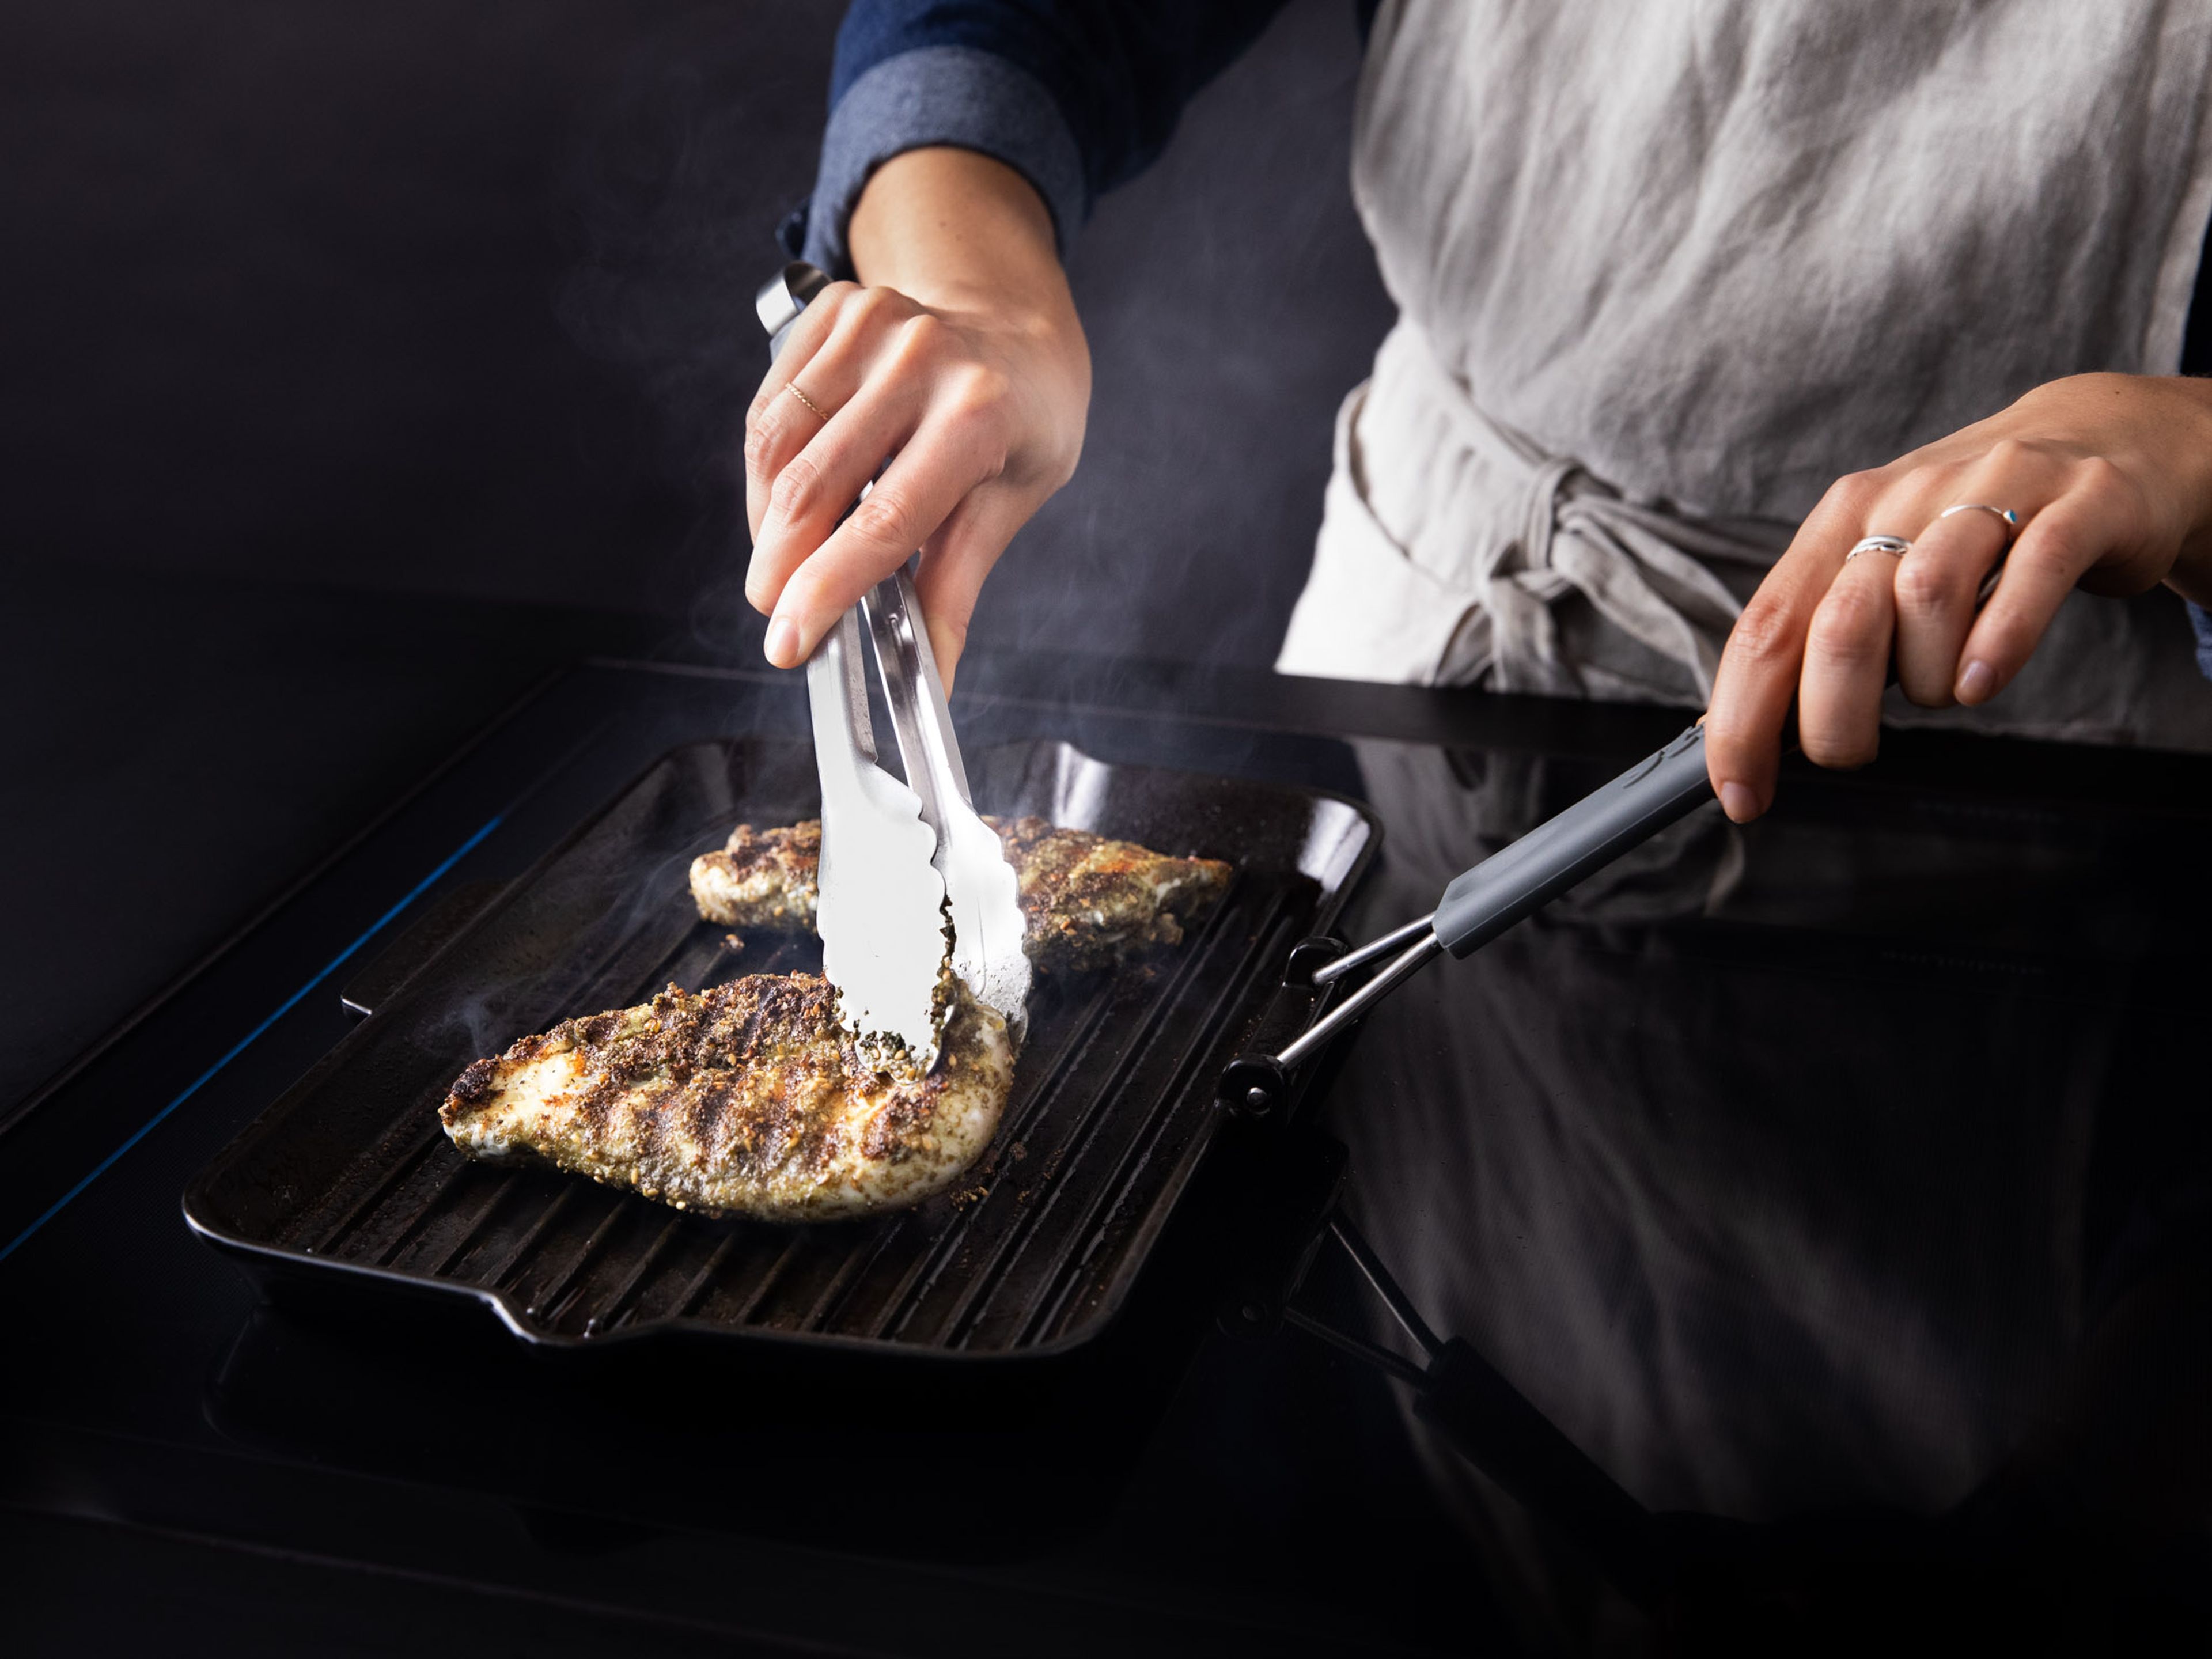 Rub a grill pan with some oil and grill the chicken breasts until cooked through, approx. 5 – 8 min. on each side. Set aside and cover with foil while you make the cucumber-yogurt sauce.